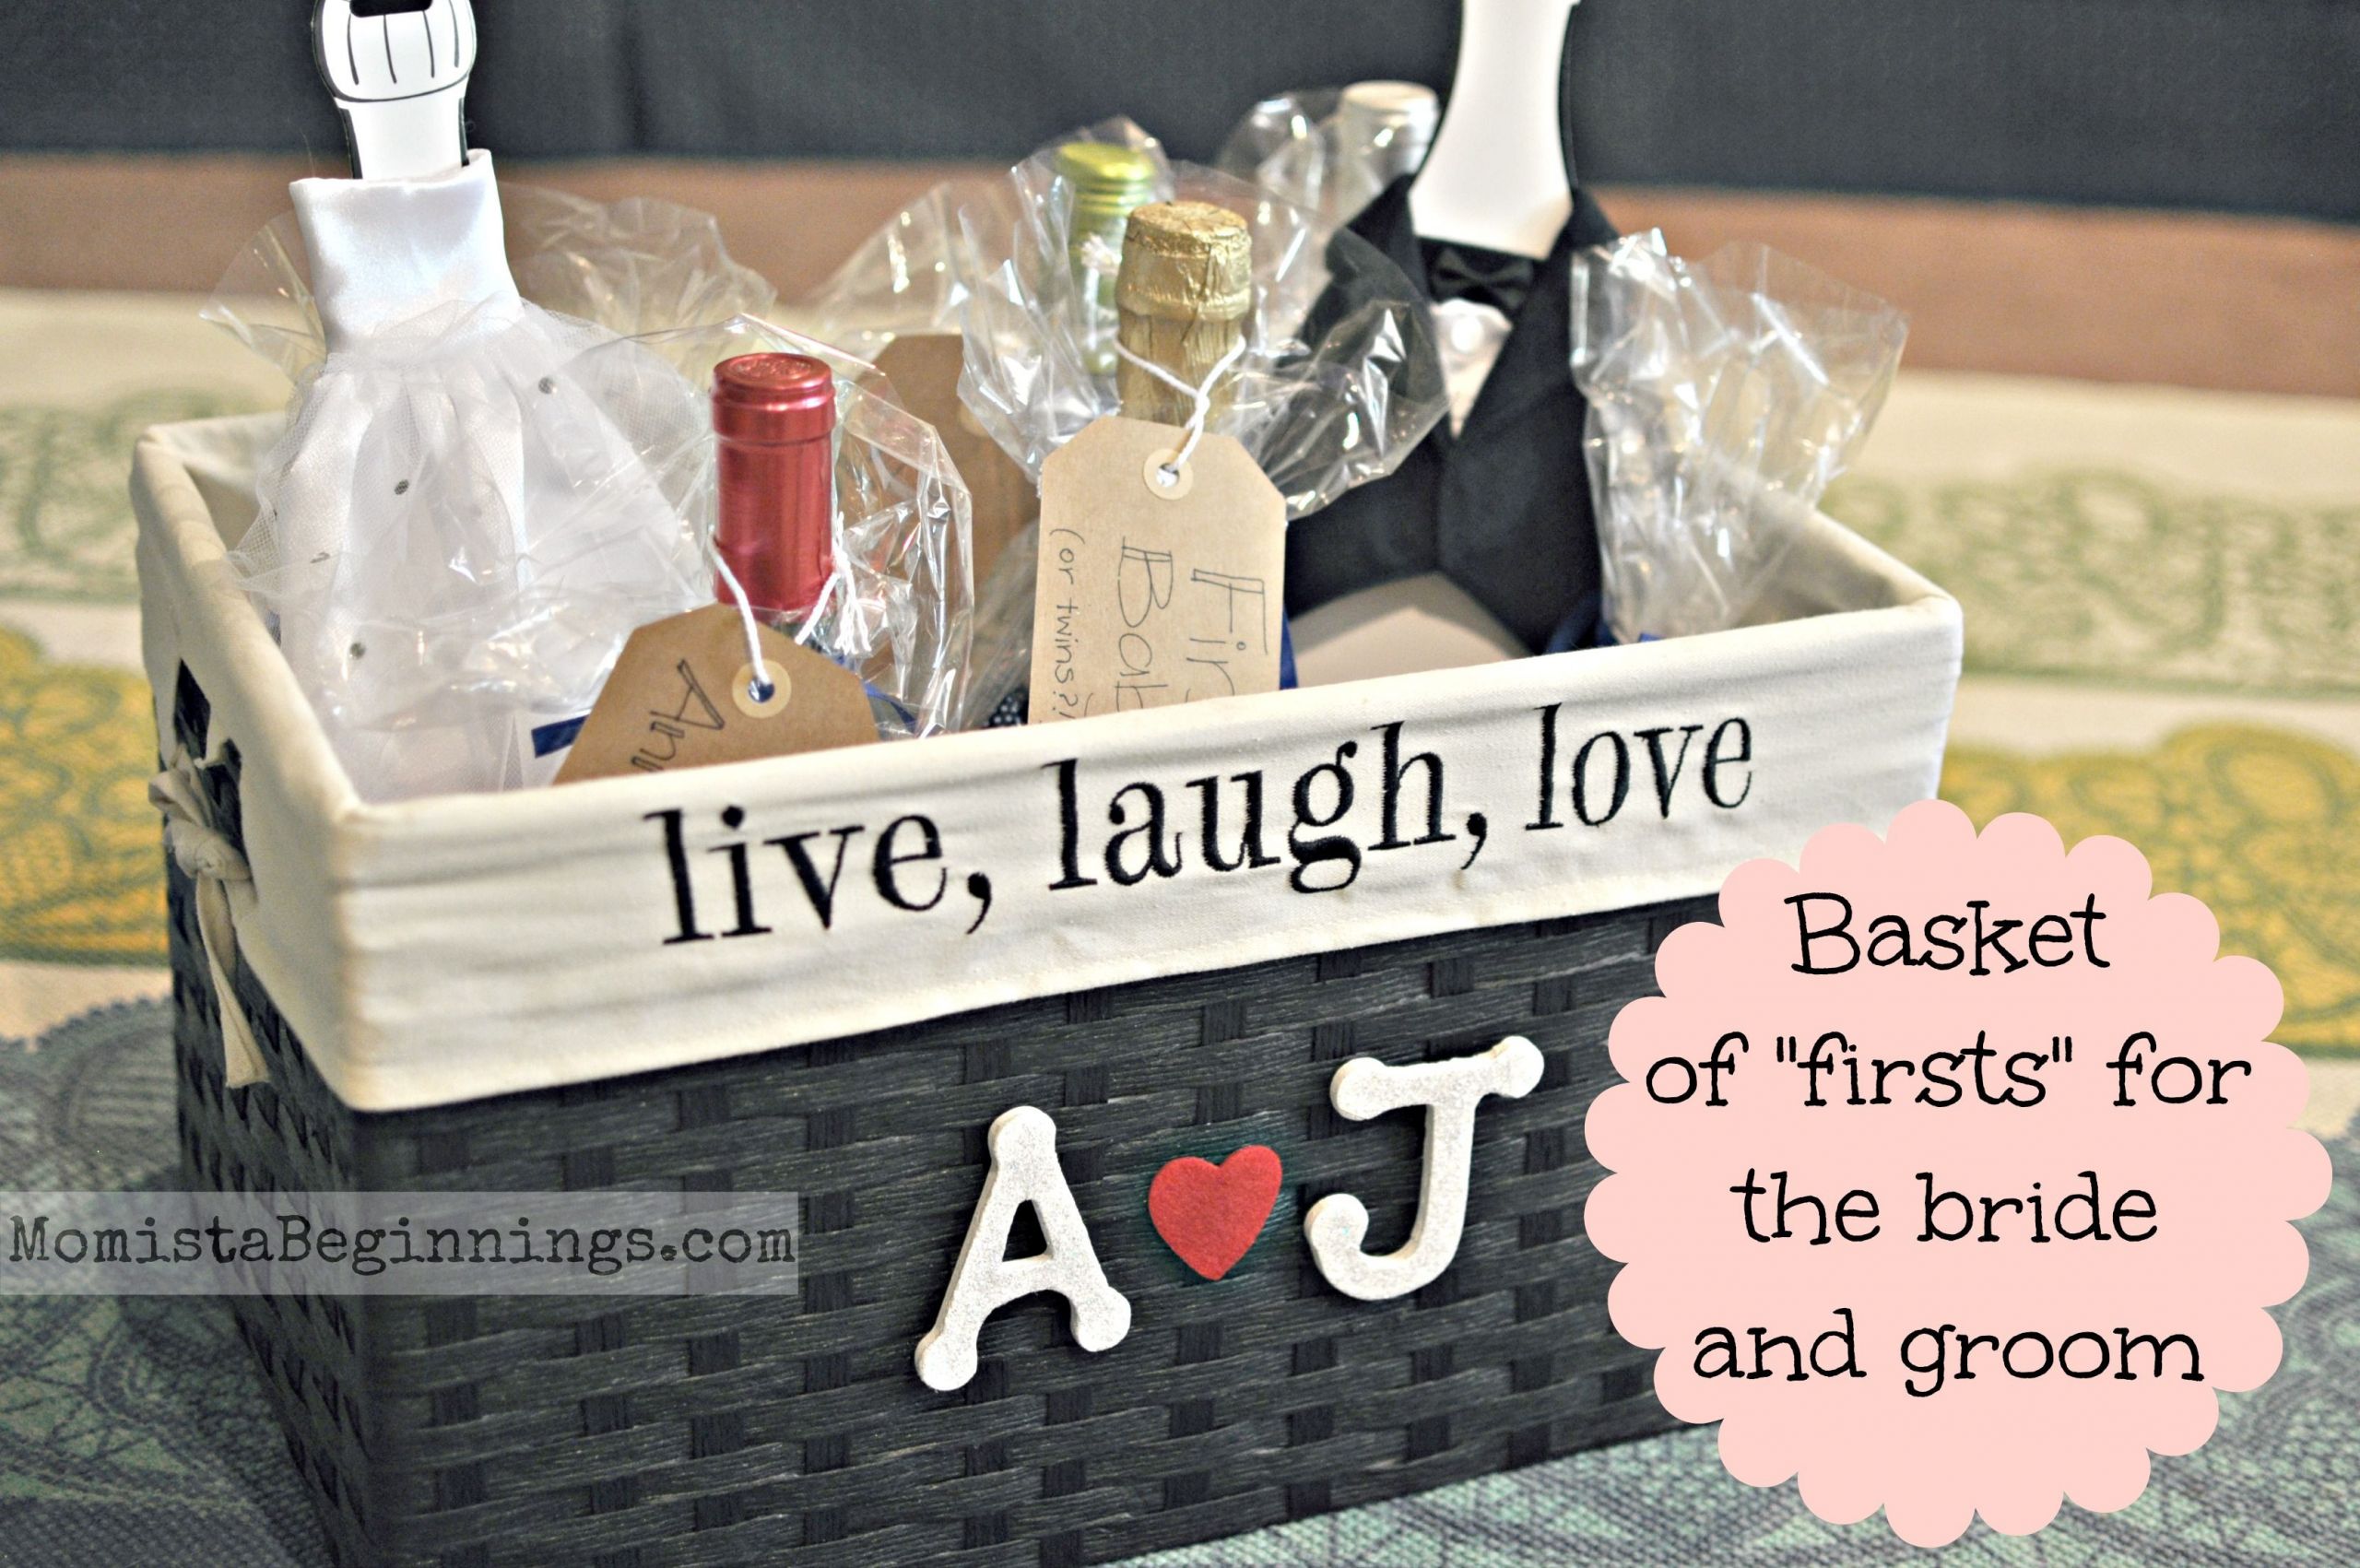 Bridesmaid Gift Basket Ideas
 Basket of "firsts" bridal shower t This idea includes